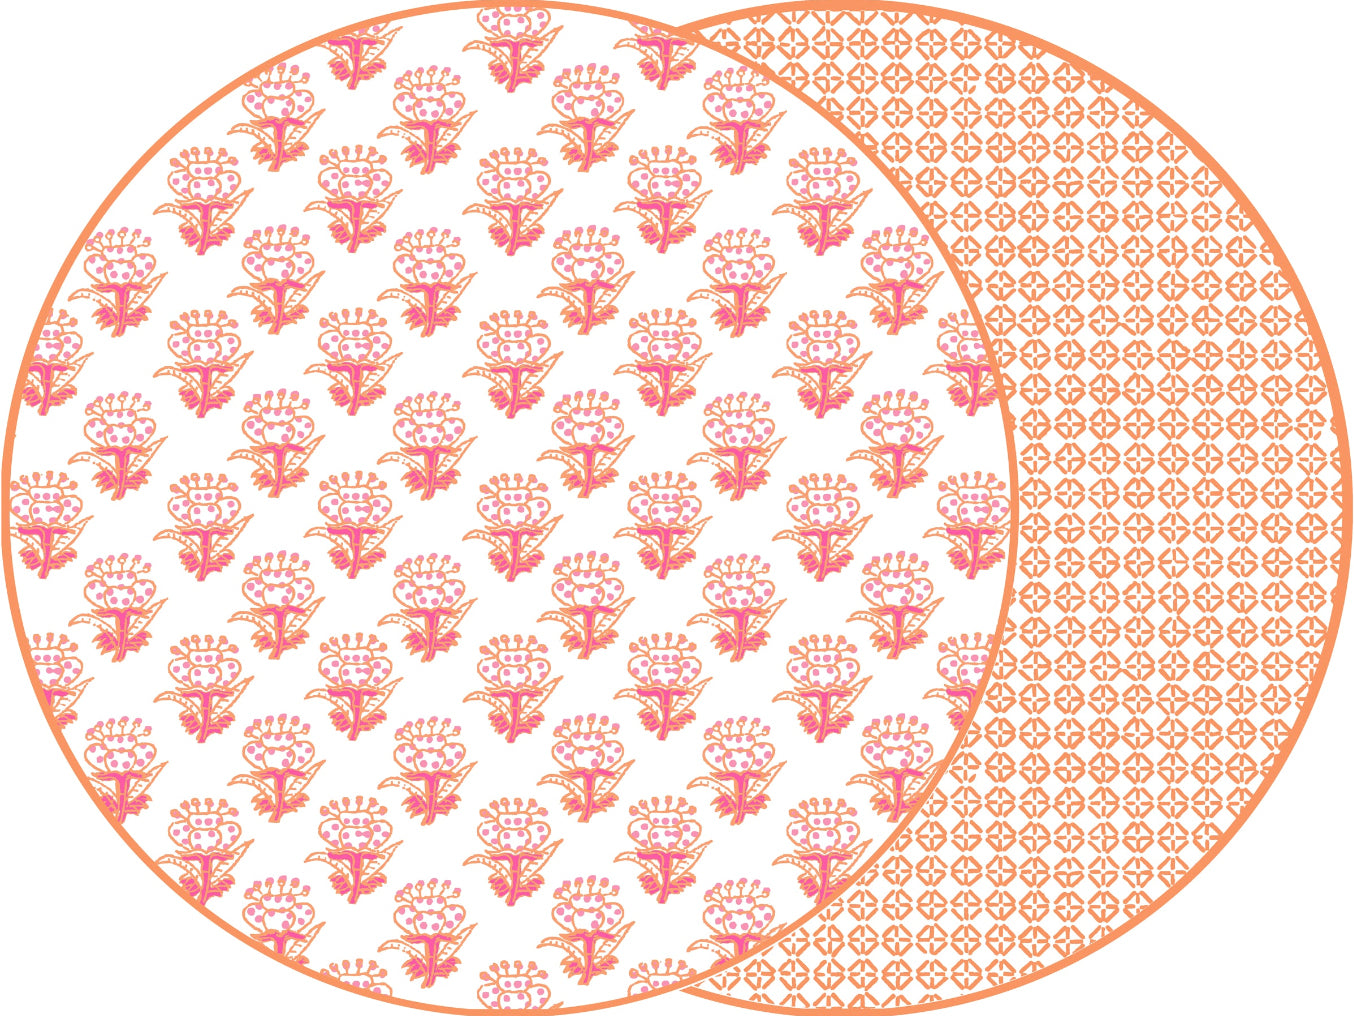 ROUND TWO SIDED PETITE FLEUR  AND JAIPUR PLACEMAT ~ PINK/ORANGE